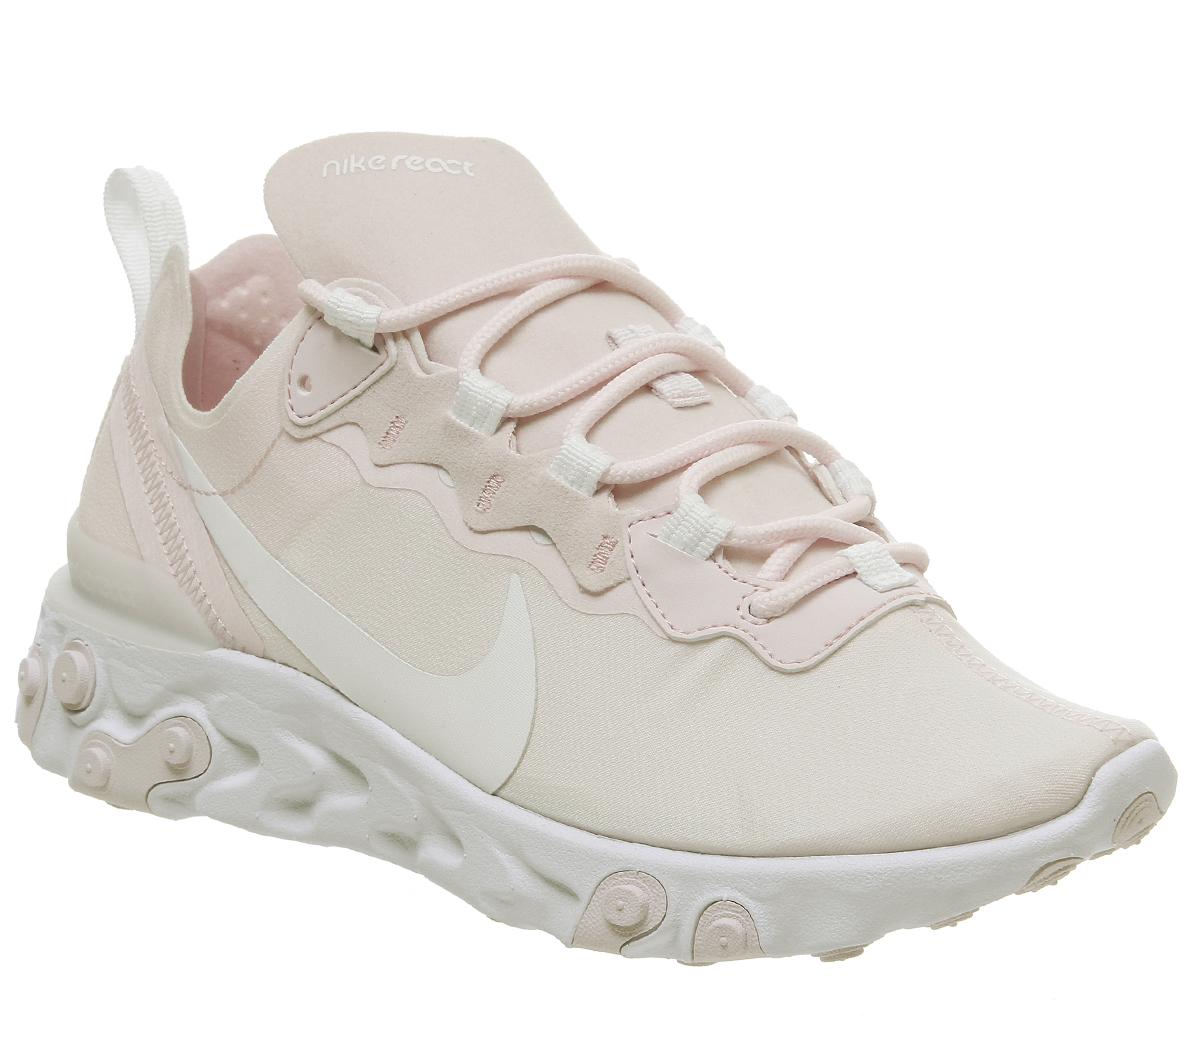 NikeReact Element 55 TrainersPale Pink White White Pale Pink F